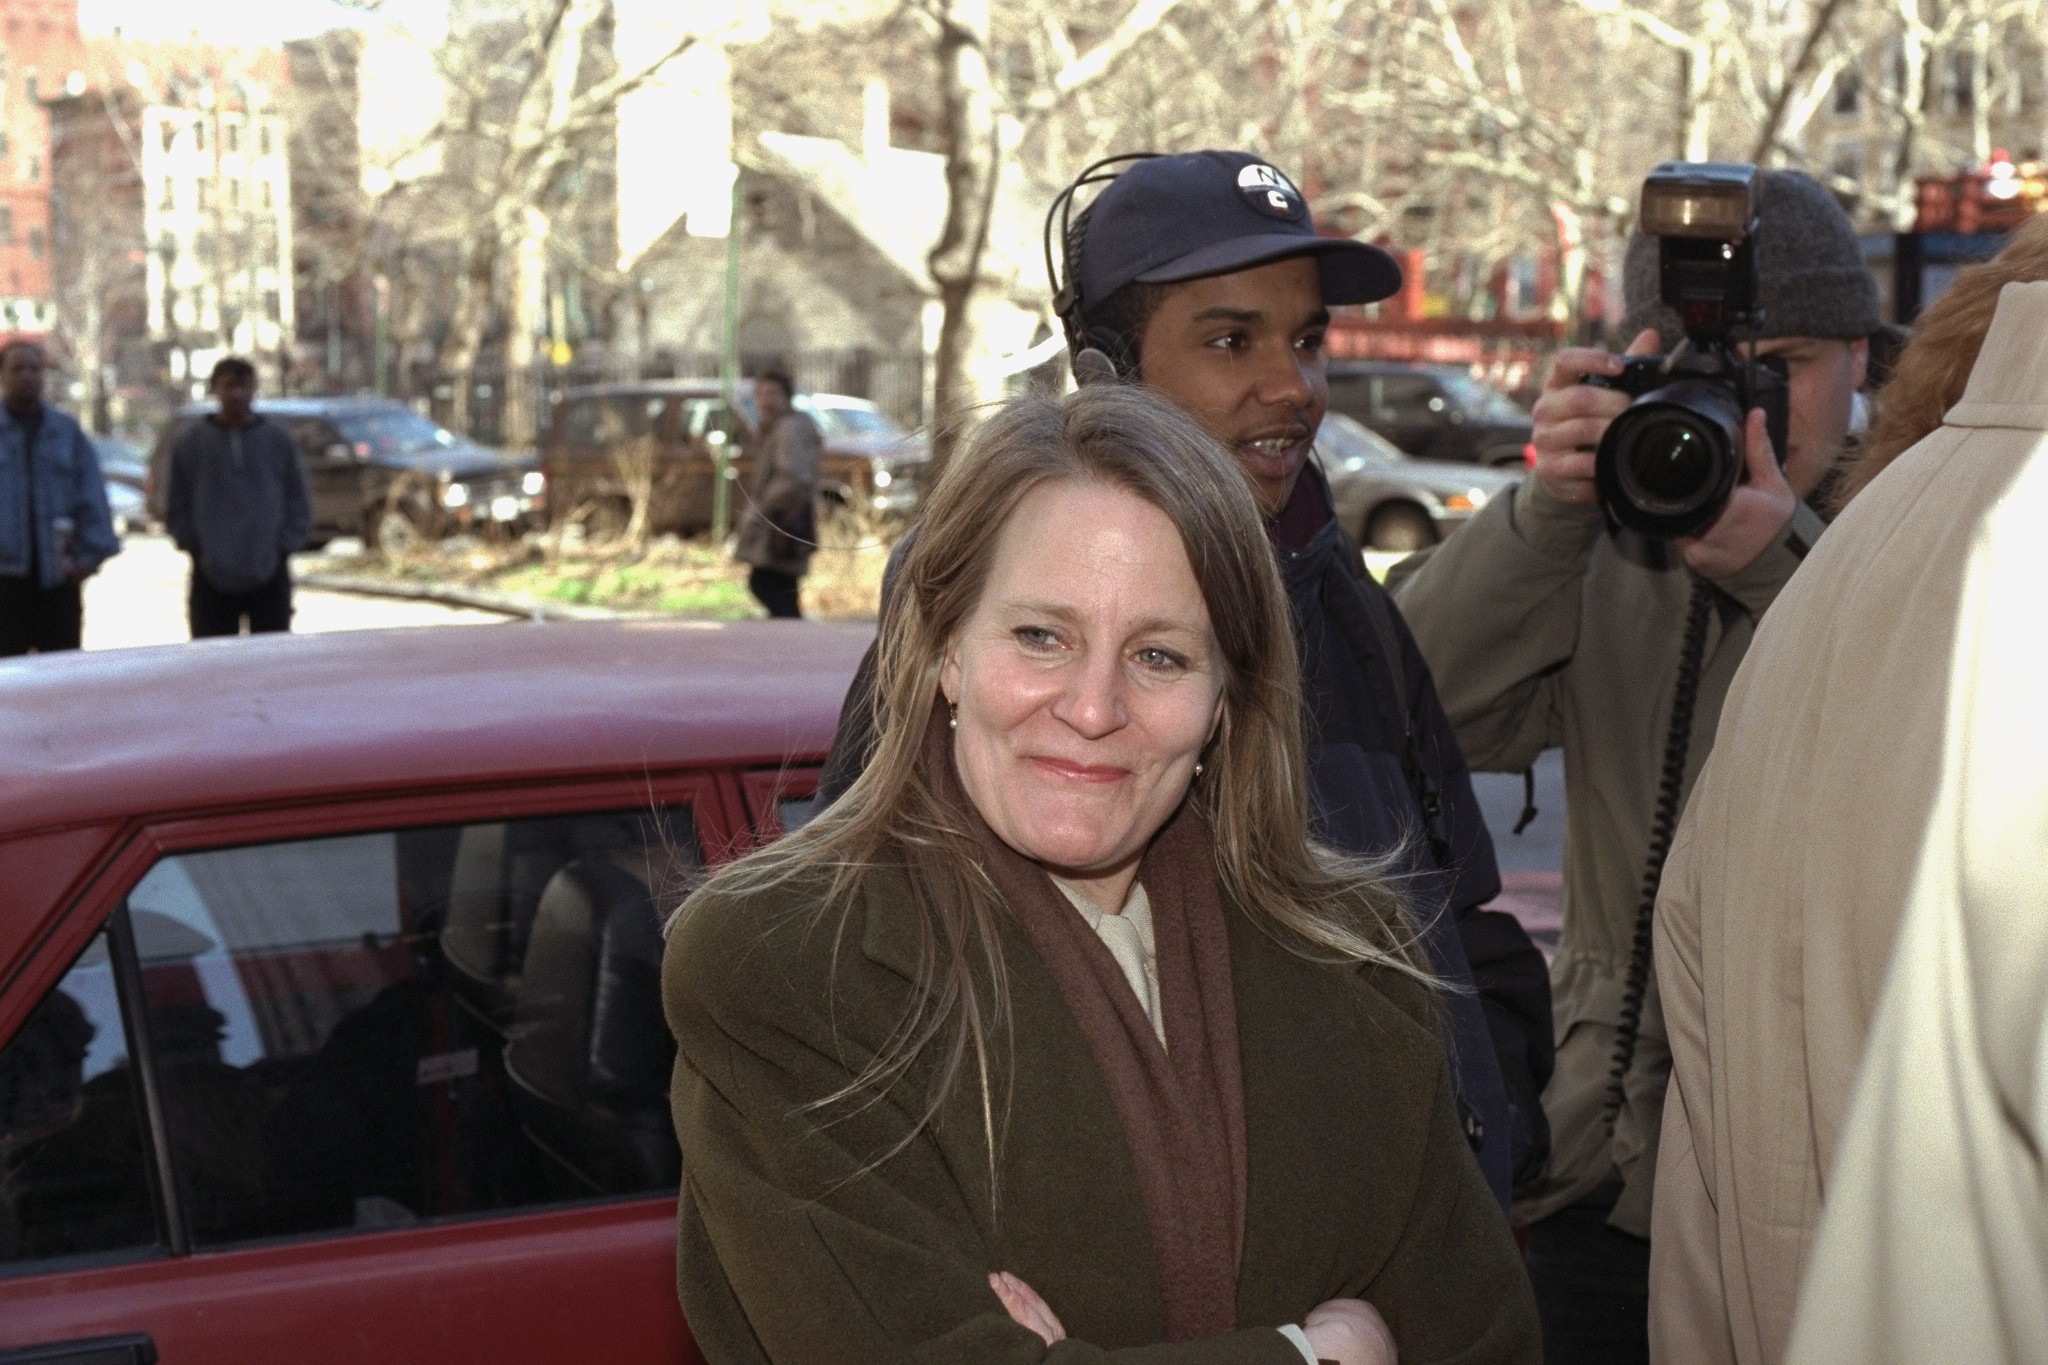 Macaulay Culkin's mother, Patricia Brentrup, in New York in 1997 |  Source: Getty Images